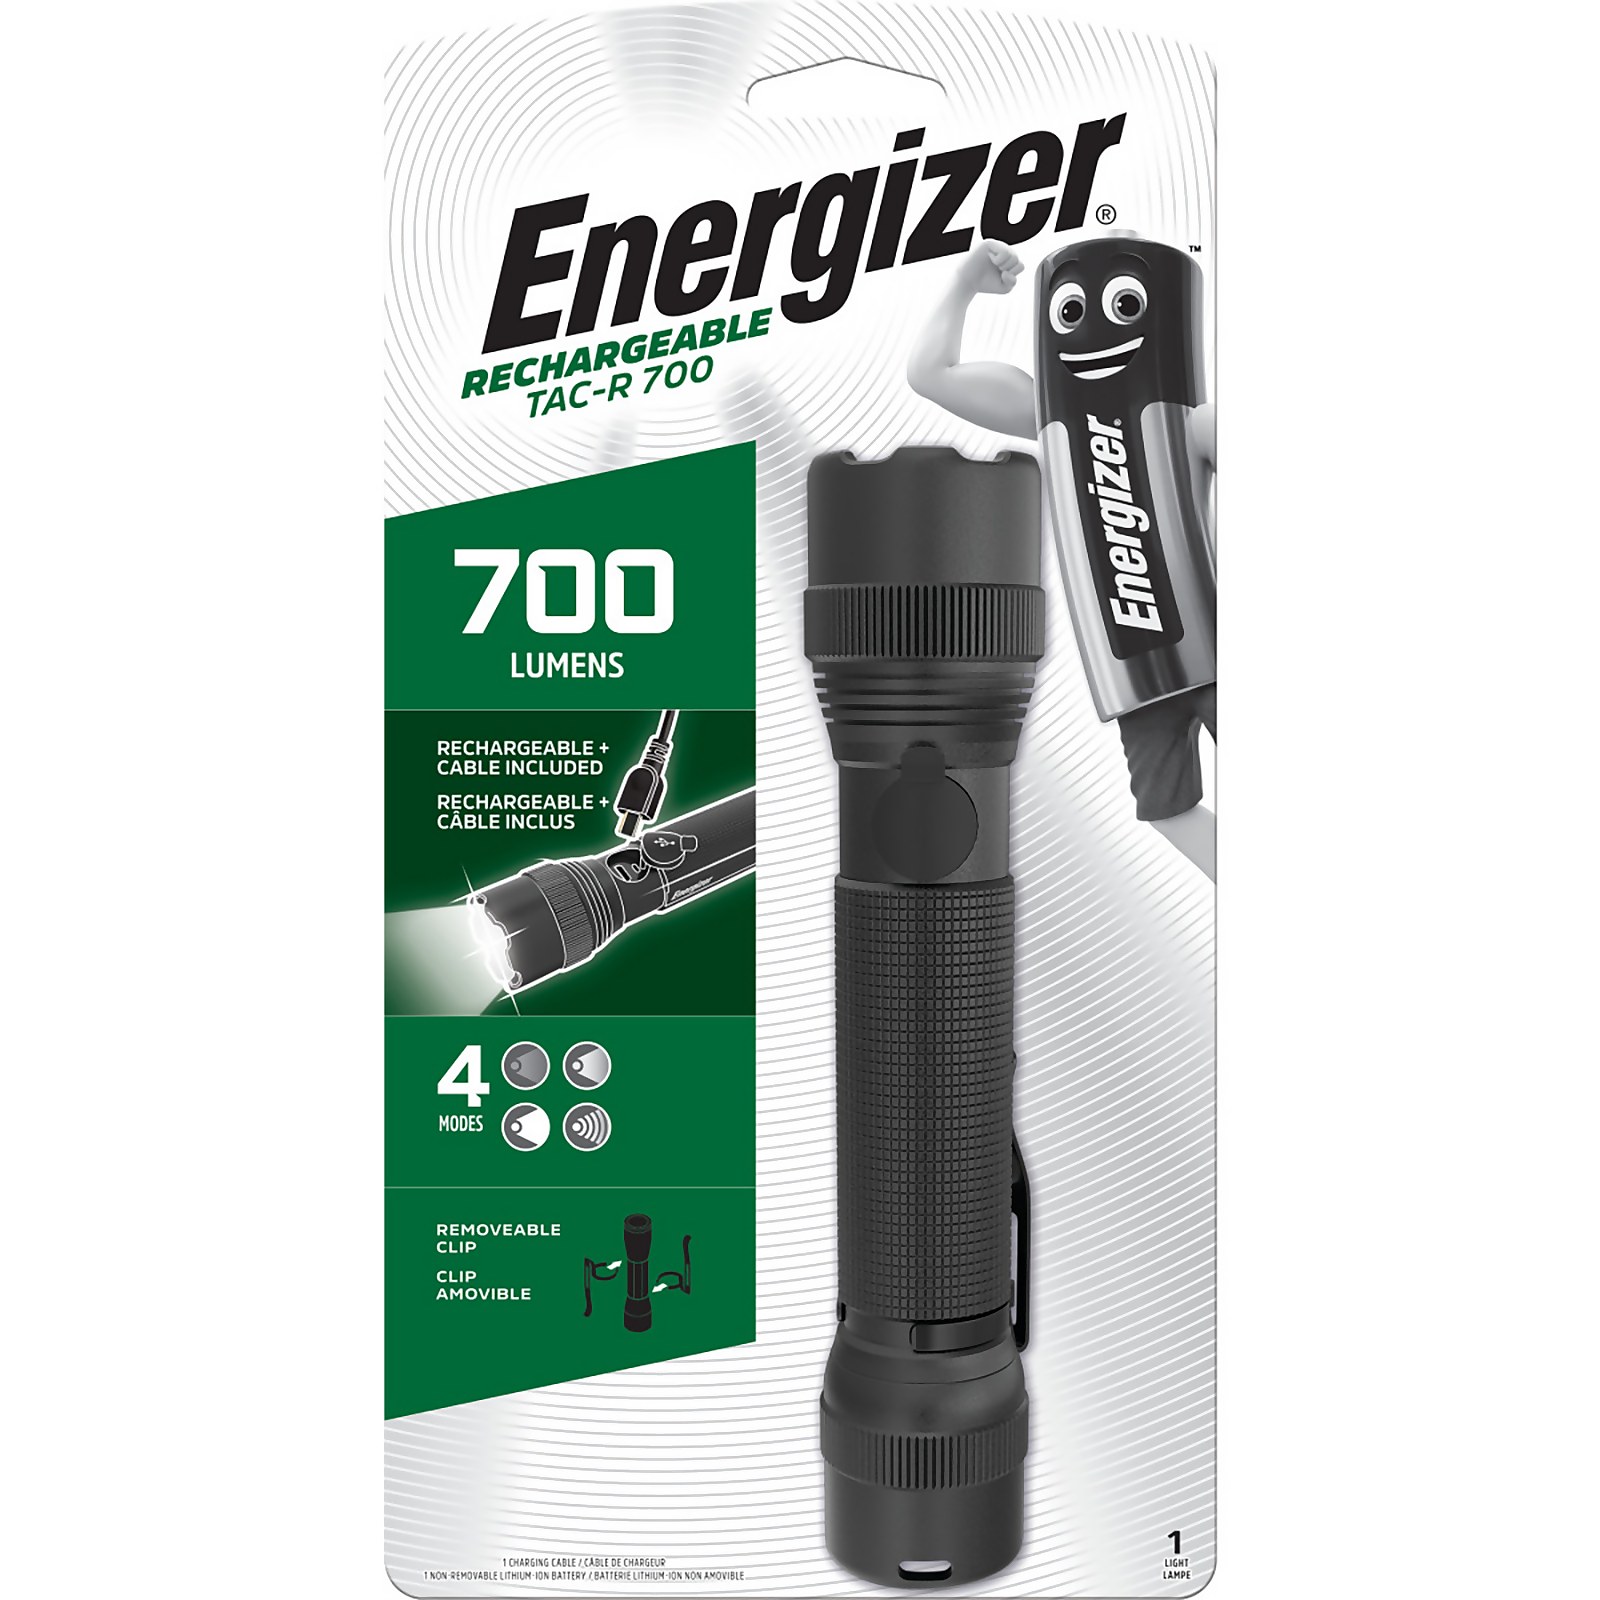 Energizer TAC-R 700 Rechargeable Tactical Metal Torch